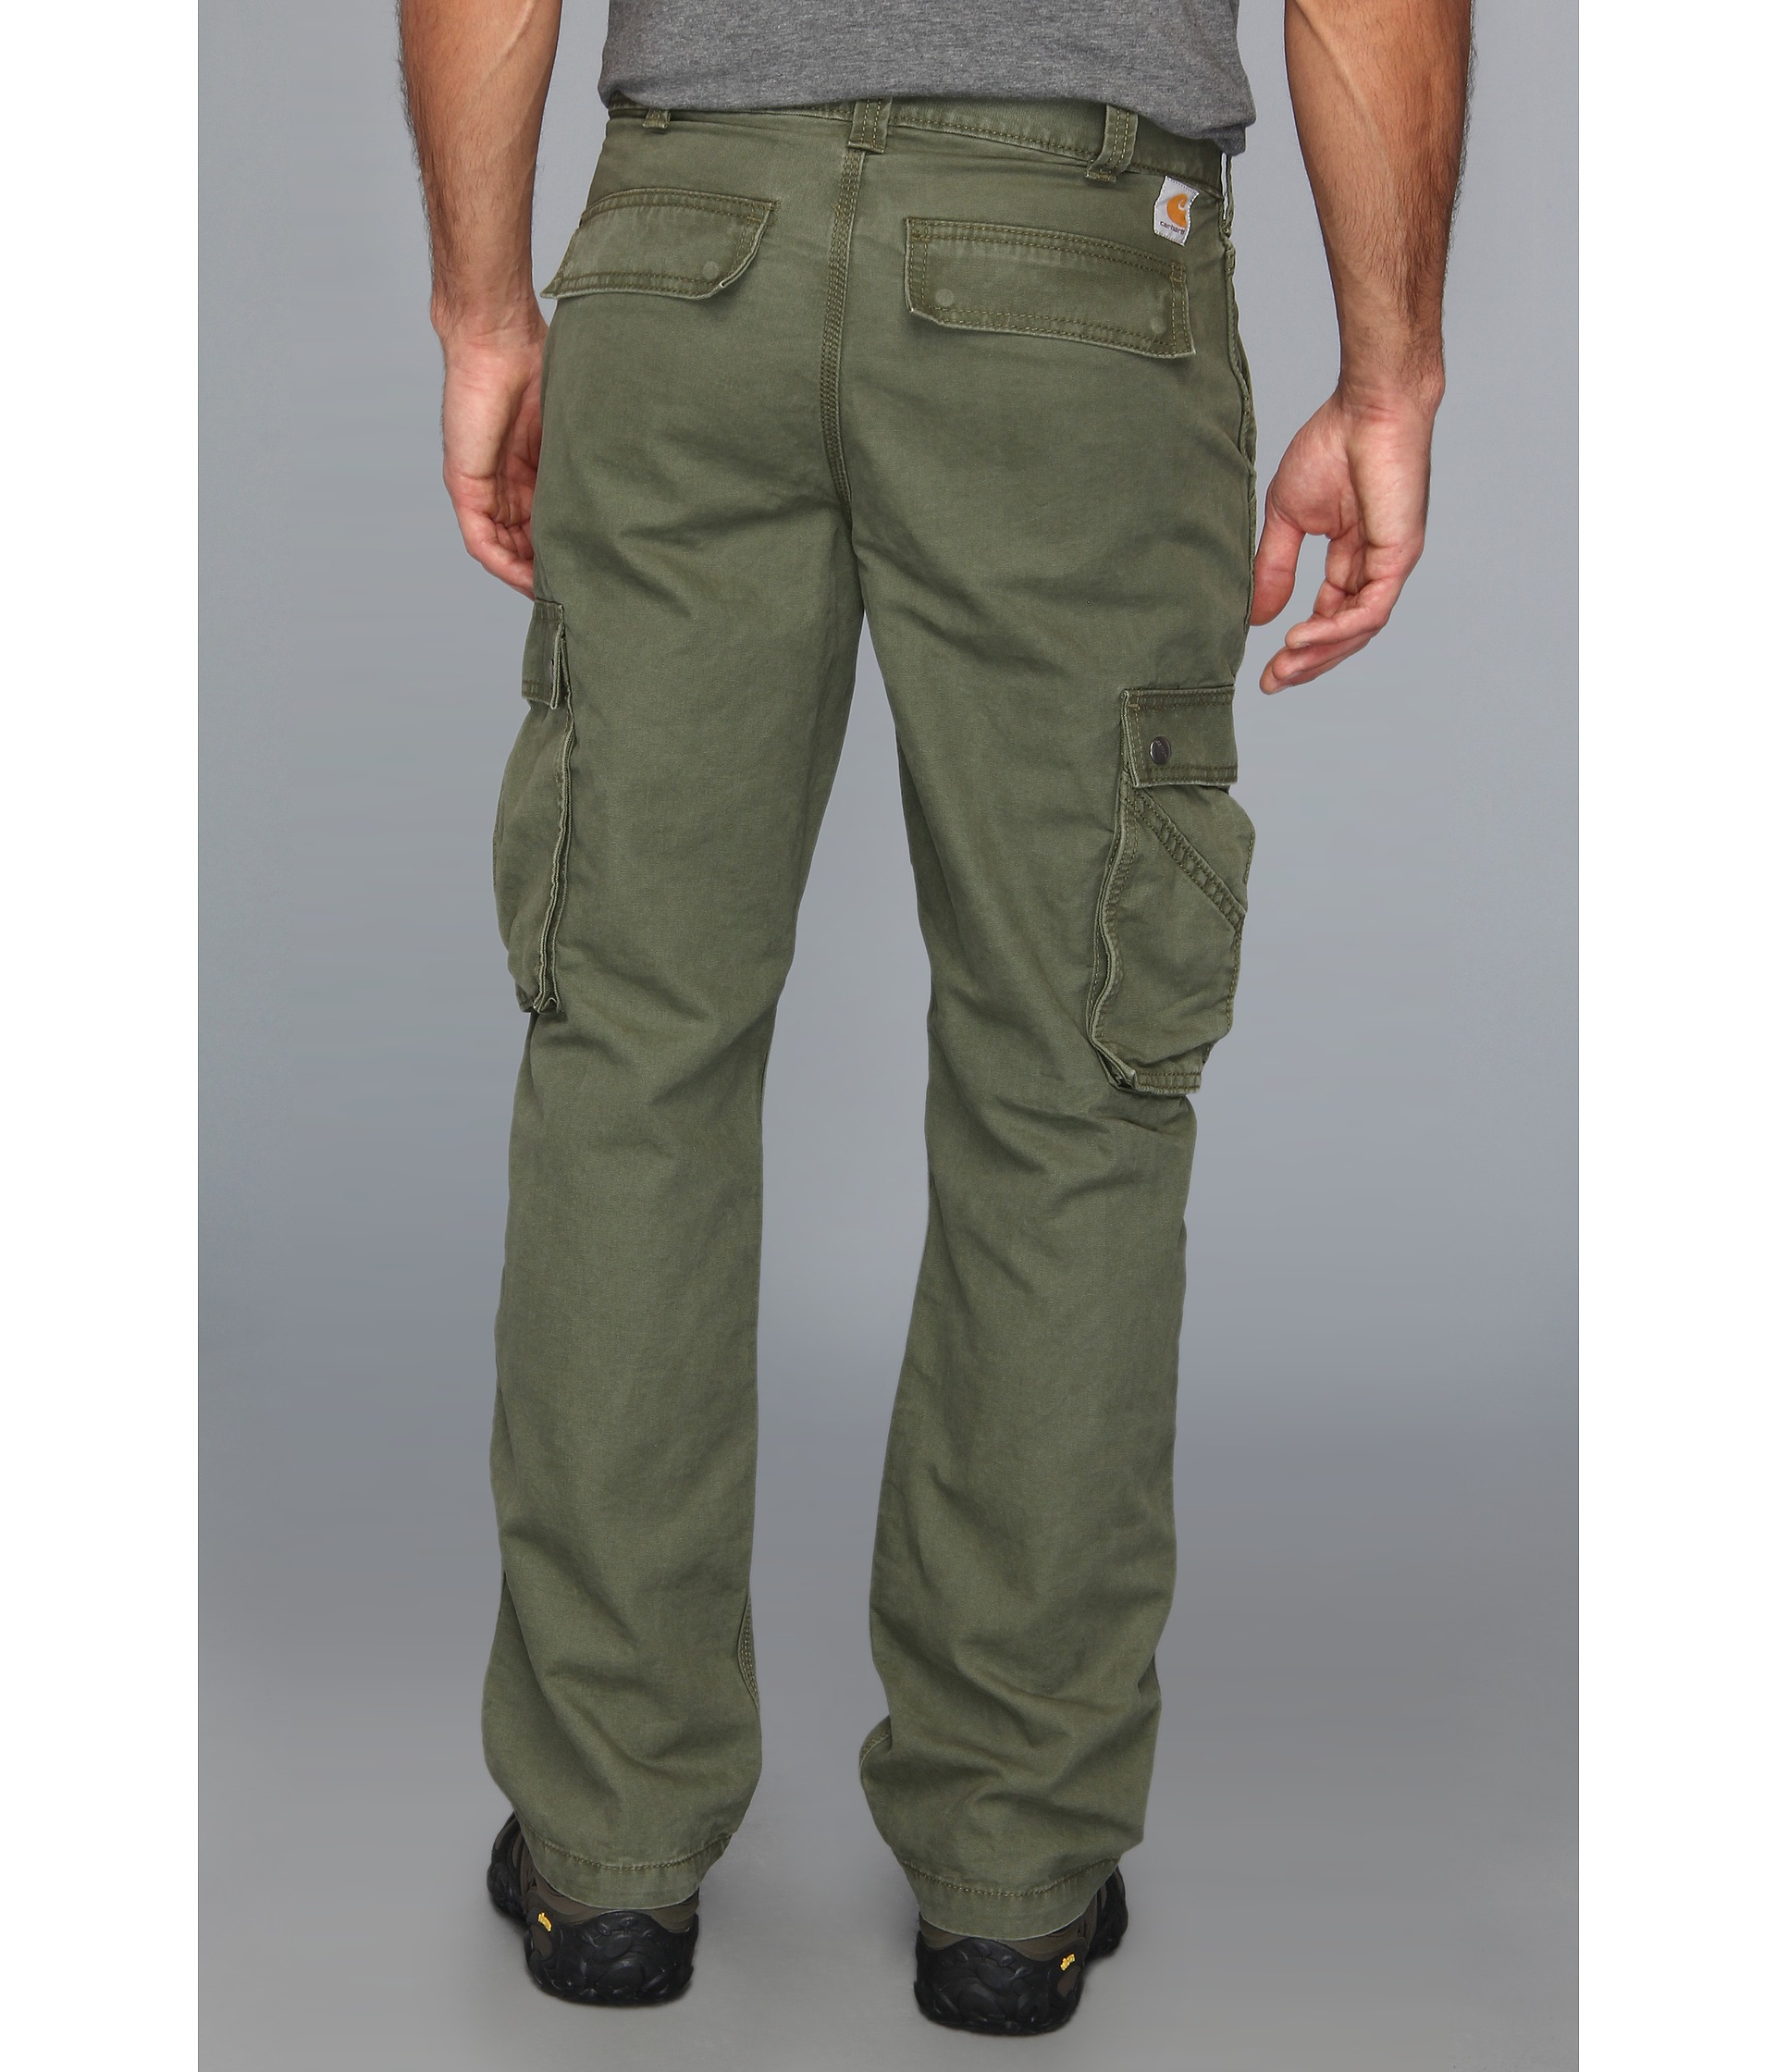 Carhartt Canvas Rugged Cargo Pant in Army Green (Green) for Men - Lyst